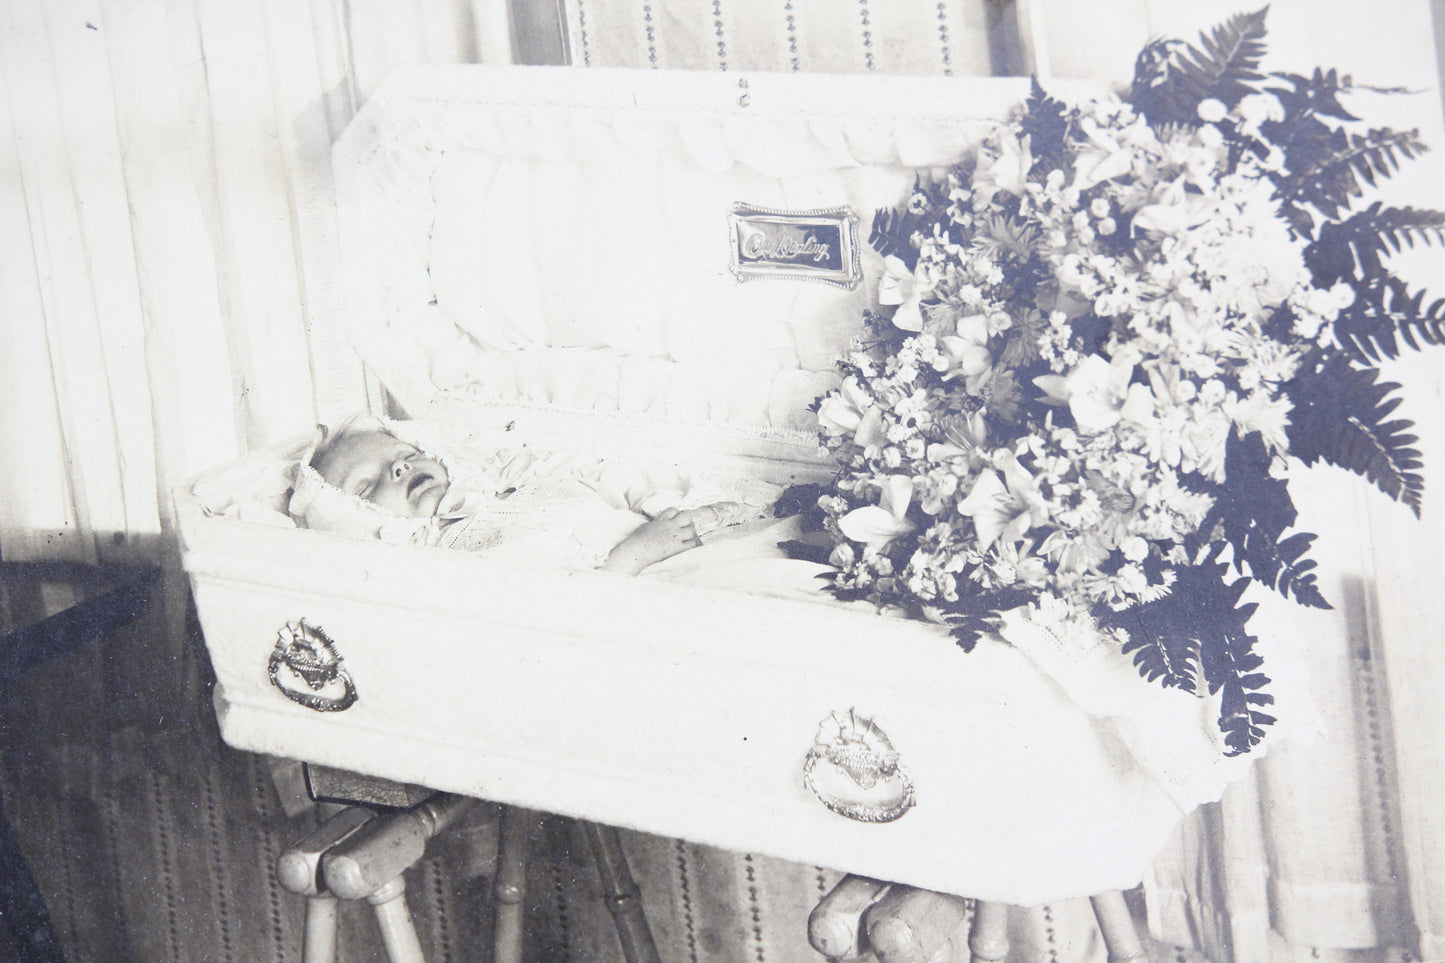 Postmortem Matted Photograph of Young Child in Coffin, "Our Darling"